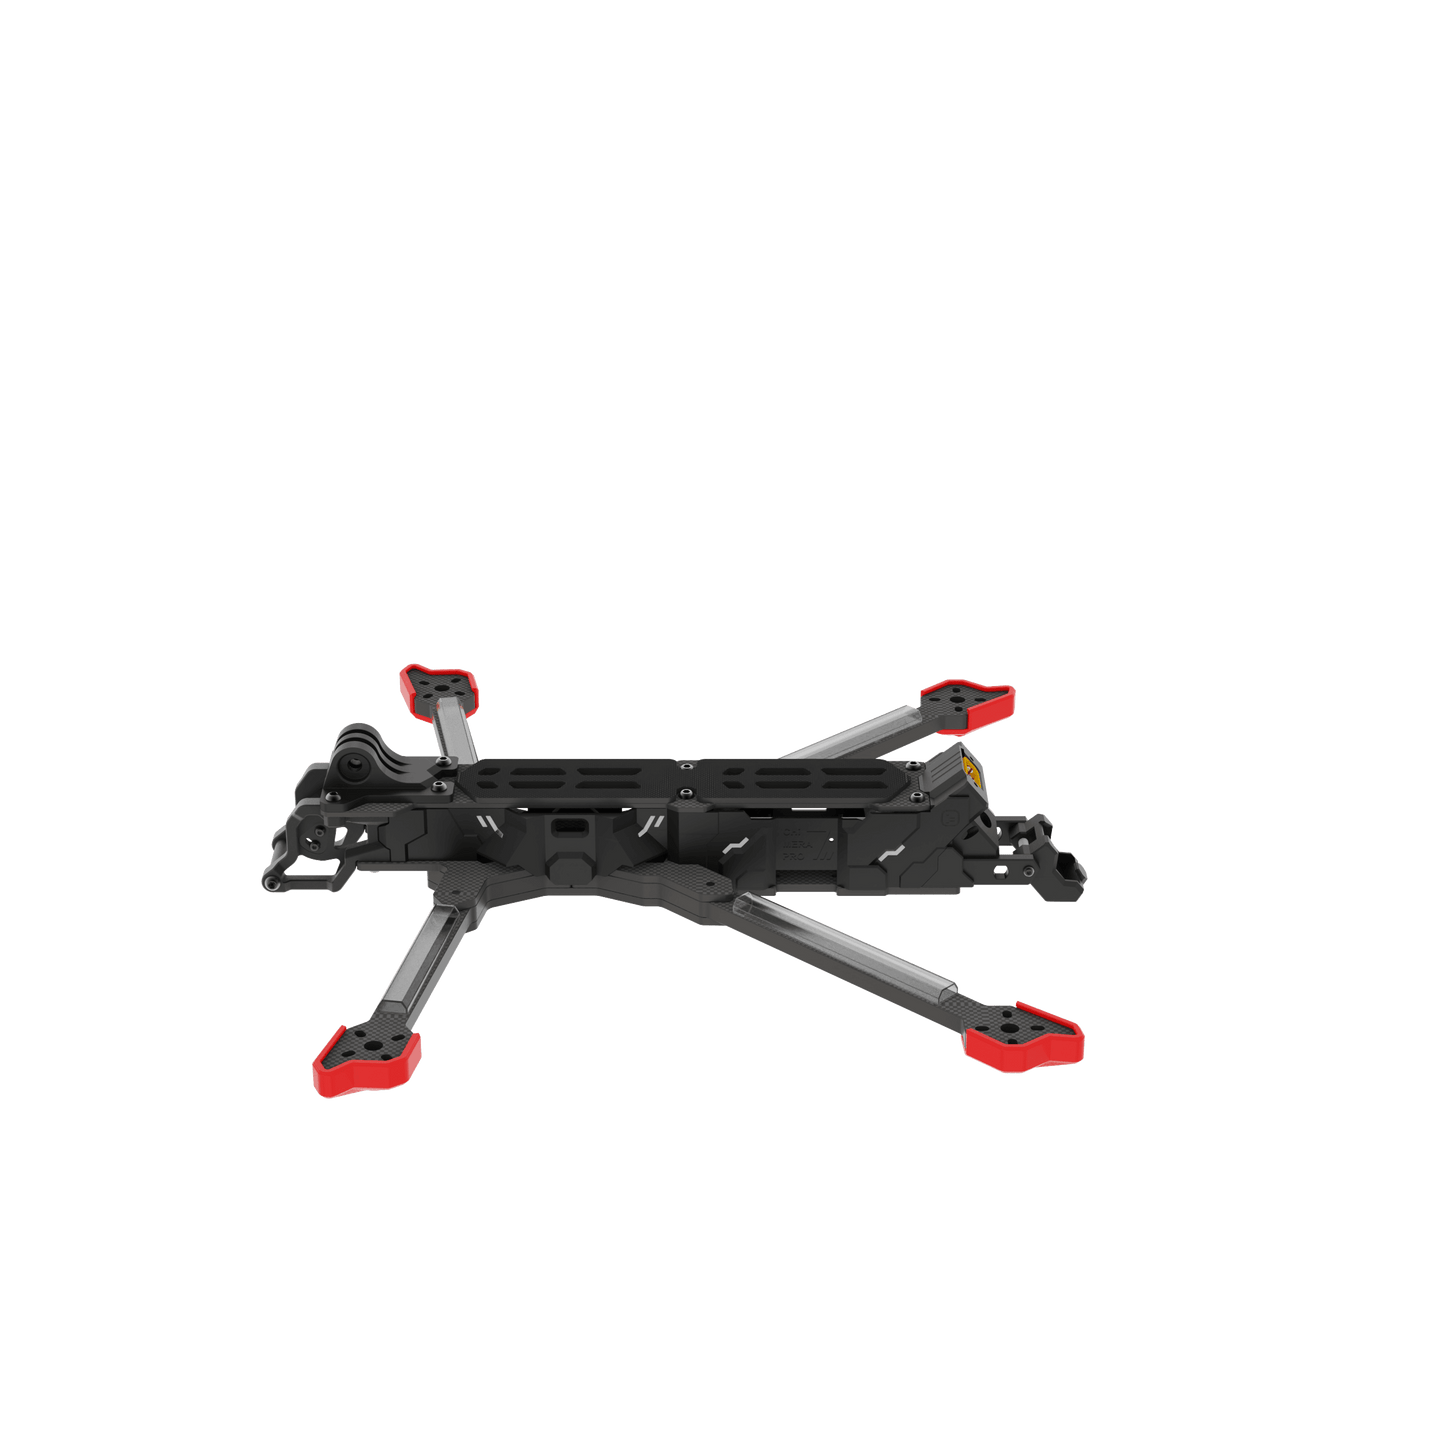 iFlight Chimera7 Pro V2 7.5inch Frame Long Range Frame Kit with 6mm arm for DJI O3 Air Unit Mount FPV Racing parts - RCDrone